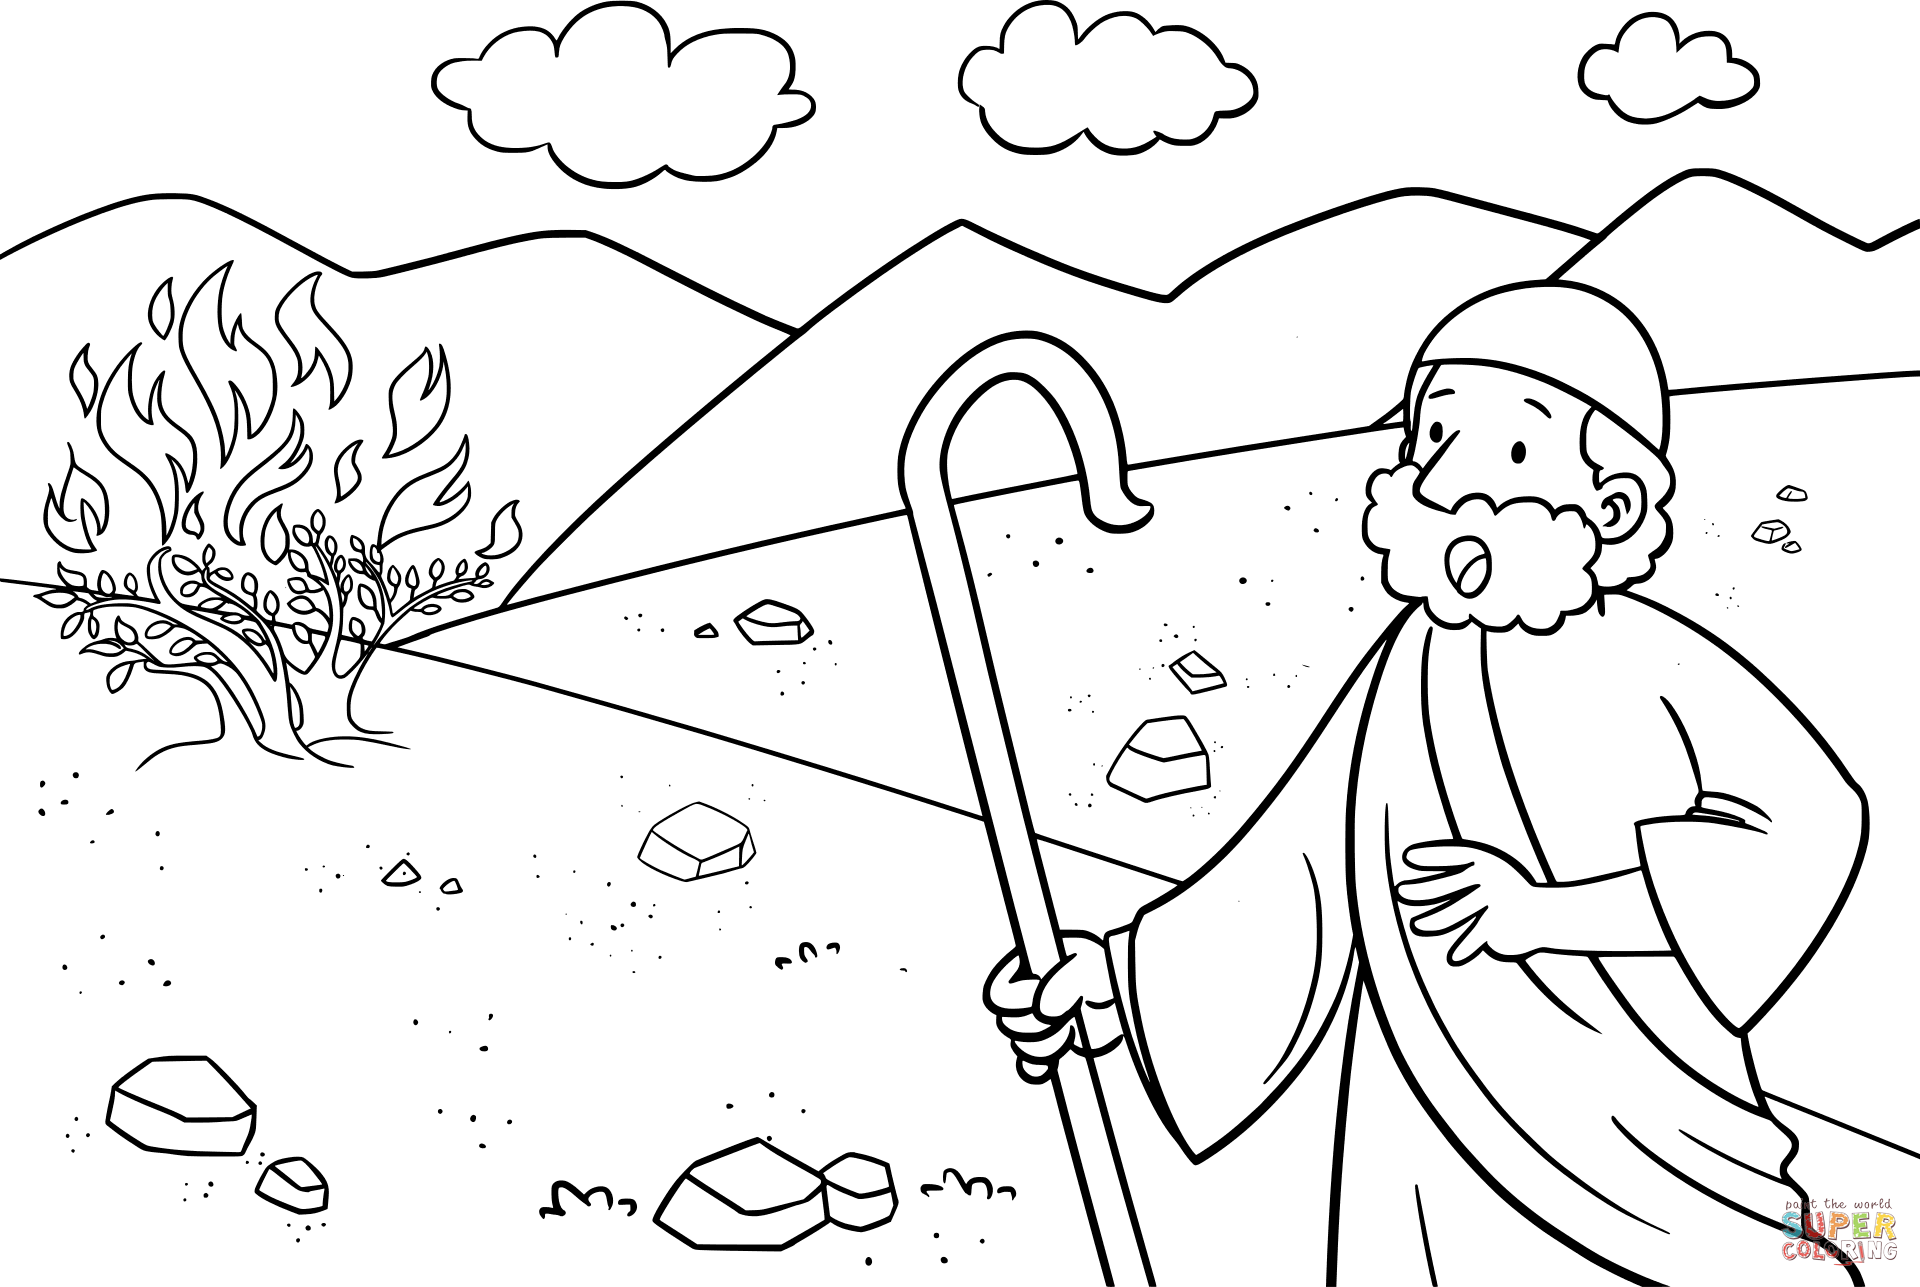 Moses the burning bush coloring page free printable coloring pages